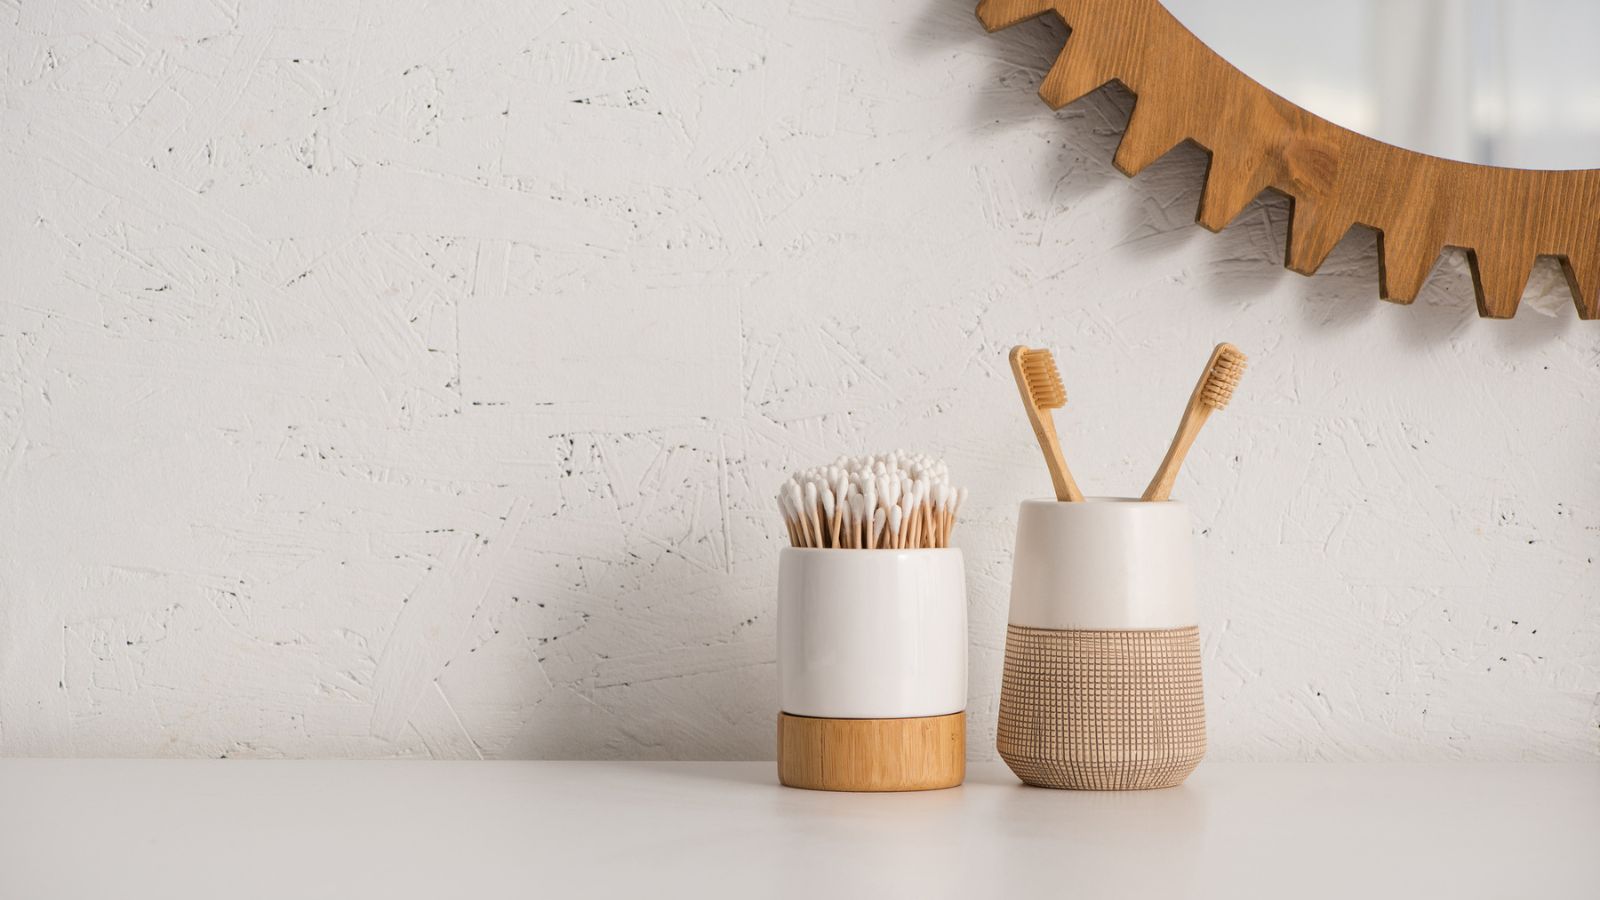 11 Creative and Quirky Ways to Reuse an Old Toothbrush